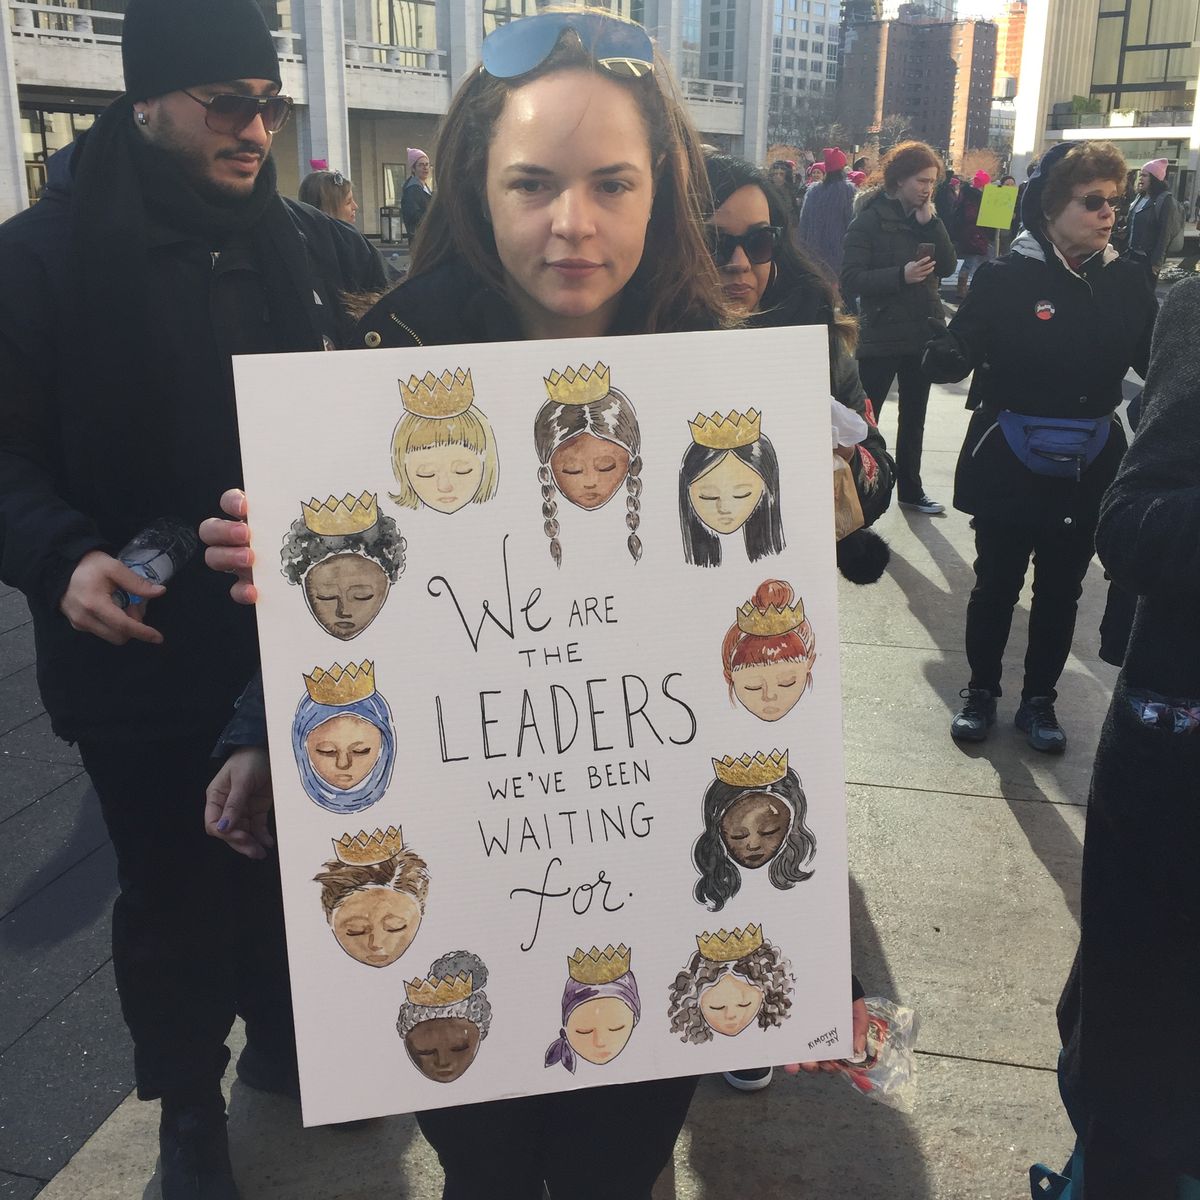 Ana Vargas, with a sign designed by artist Kimothy Joy, at the New York City women’s march